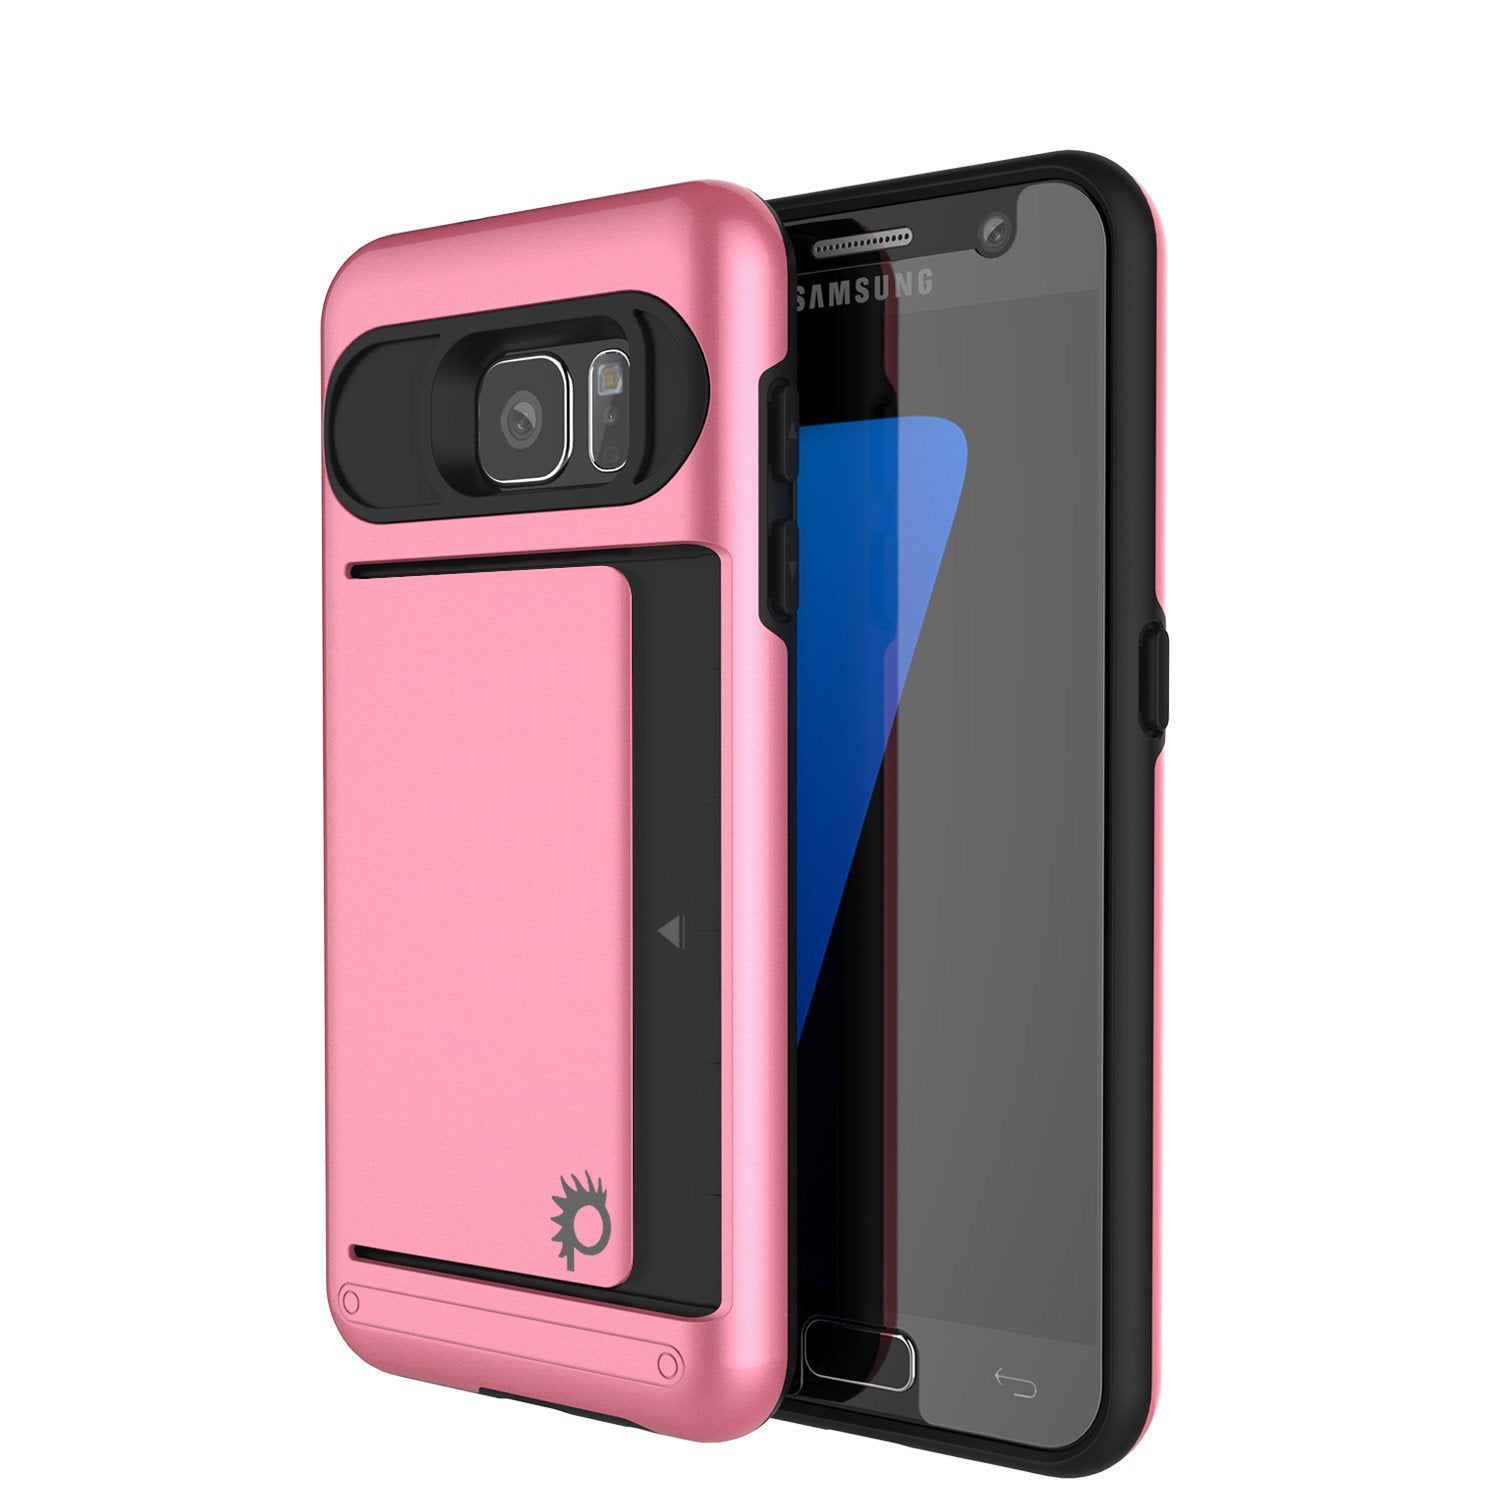 Galaxy s7 Case PunkCase CLUTCH Pink Series Slim Armor Soft Cover Case w/ Tempered Glass